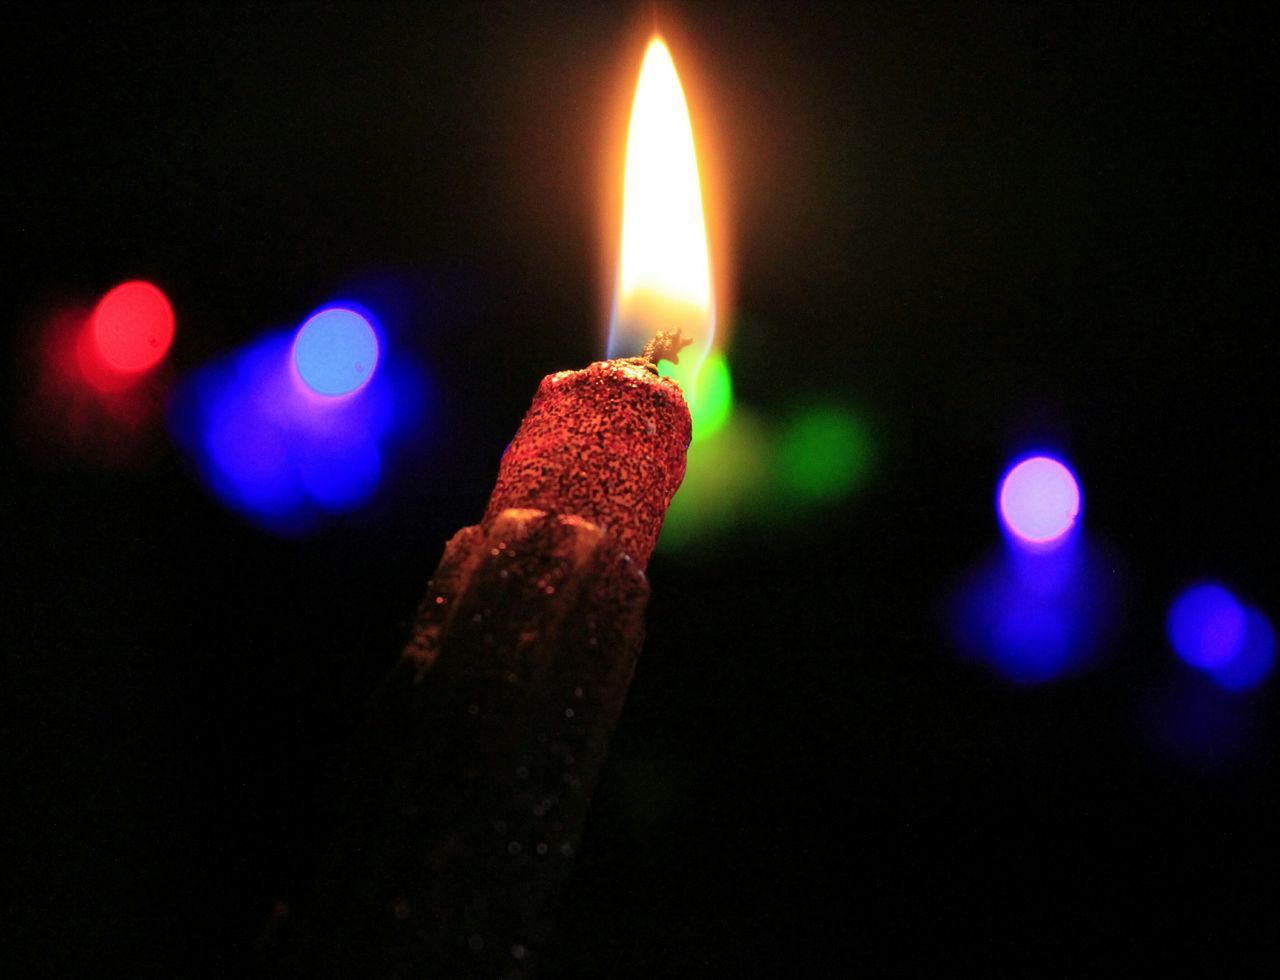 flame, burning, illuminated, night, glowing, fire - natural phenomenon, candle, heat - temperature, close-up, lit, indoors, light - natural phenomenon, focus on foreground, black background, dark, fire, lighting equipment, celebration, no people, selective focus